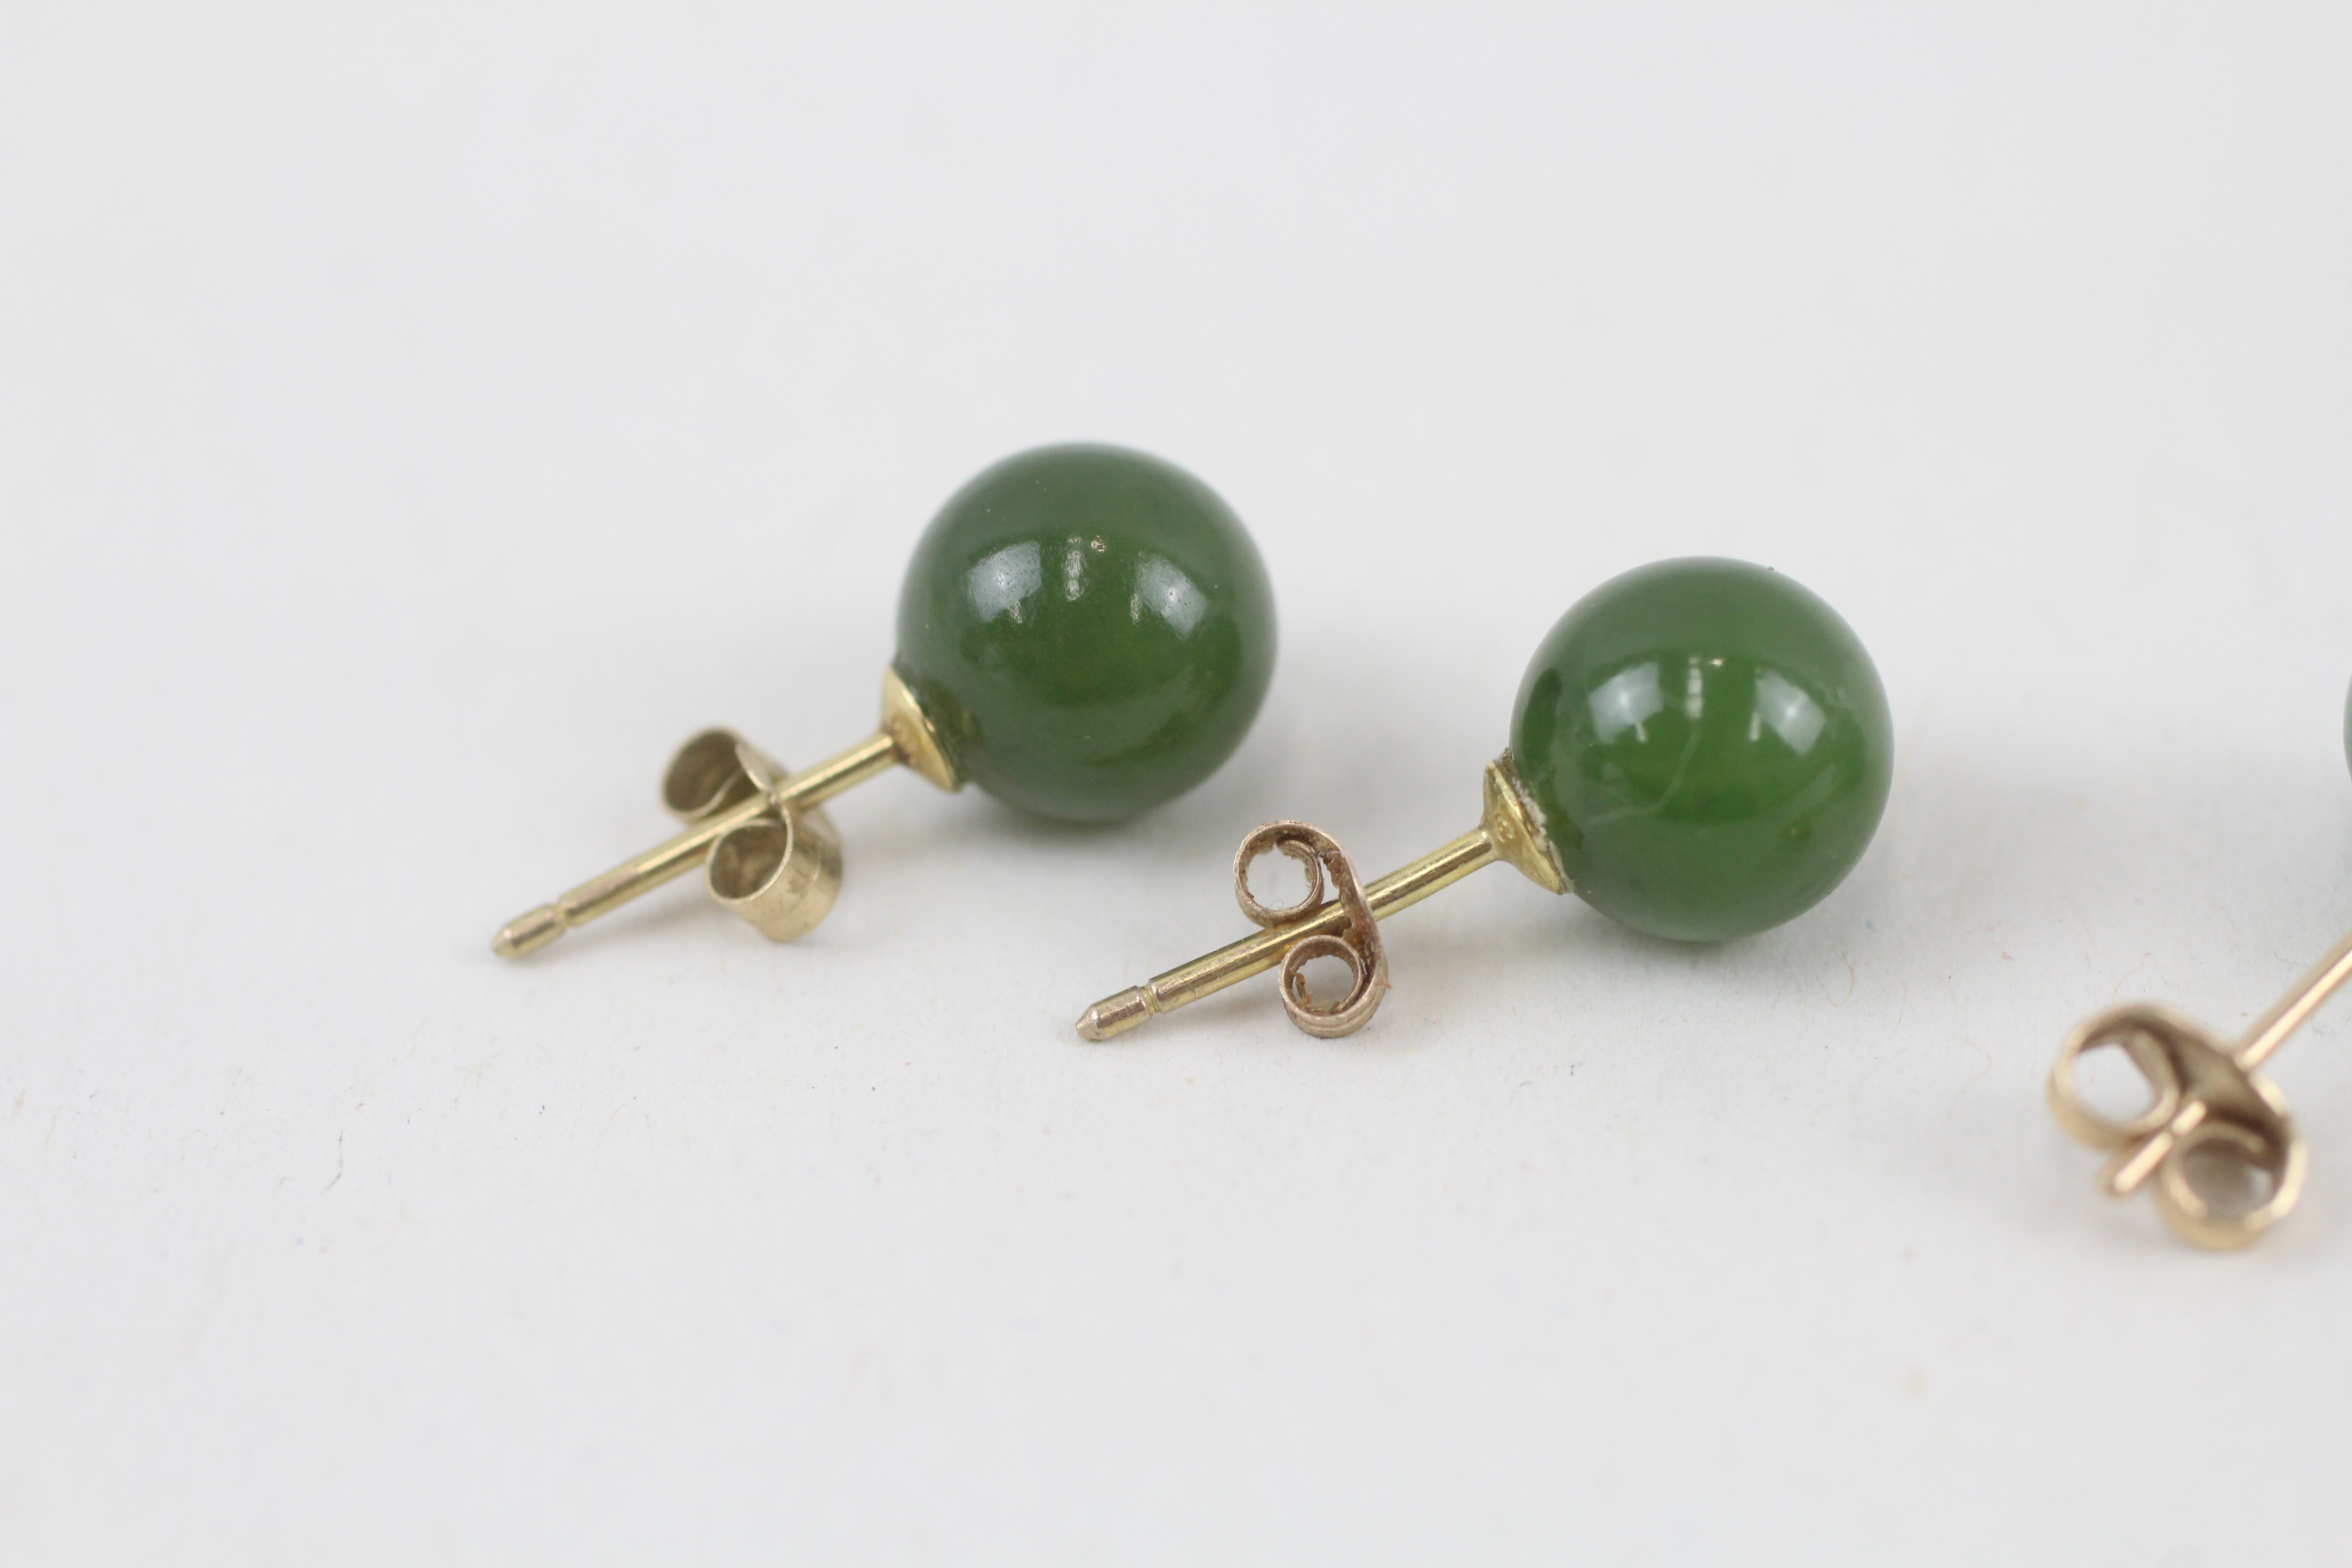 2x 9ct gold nephrite & jade stud earrings with scroll backs - 3.7 g - Image 5 of 6